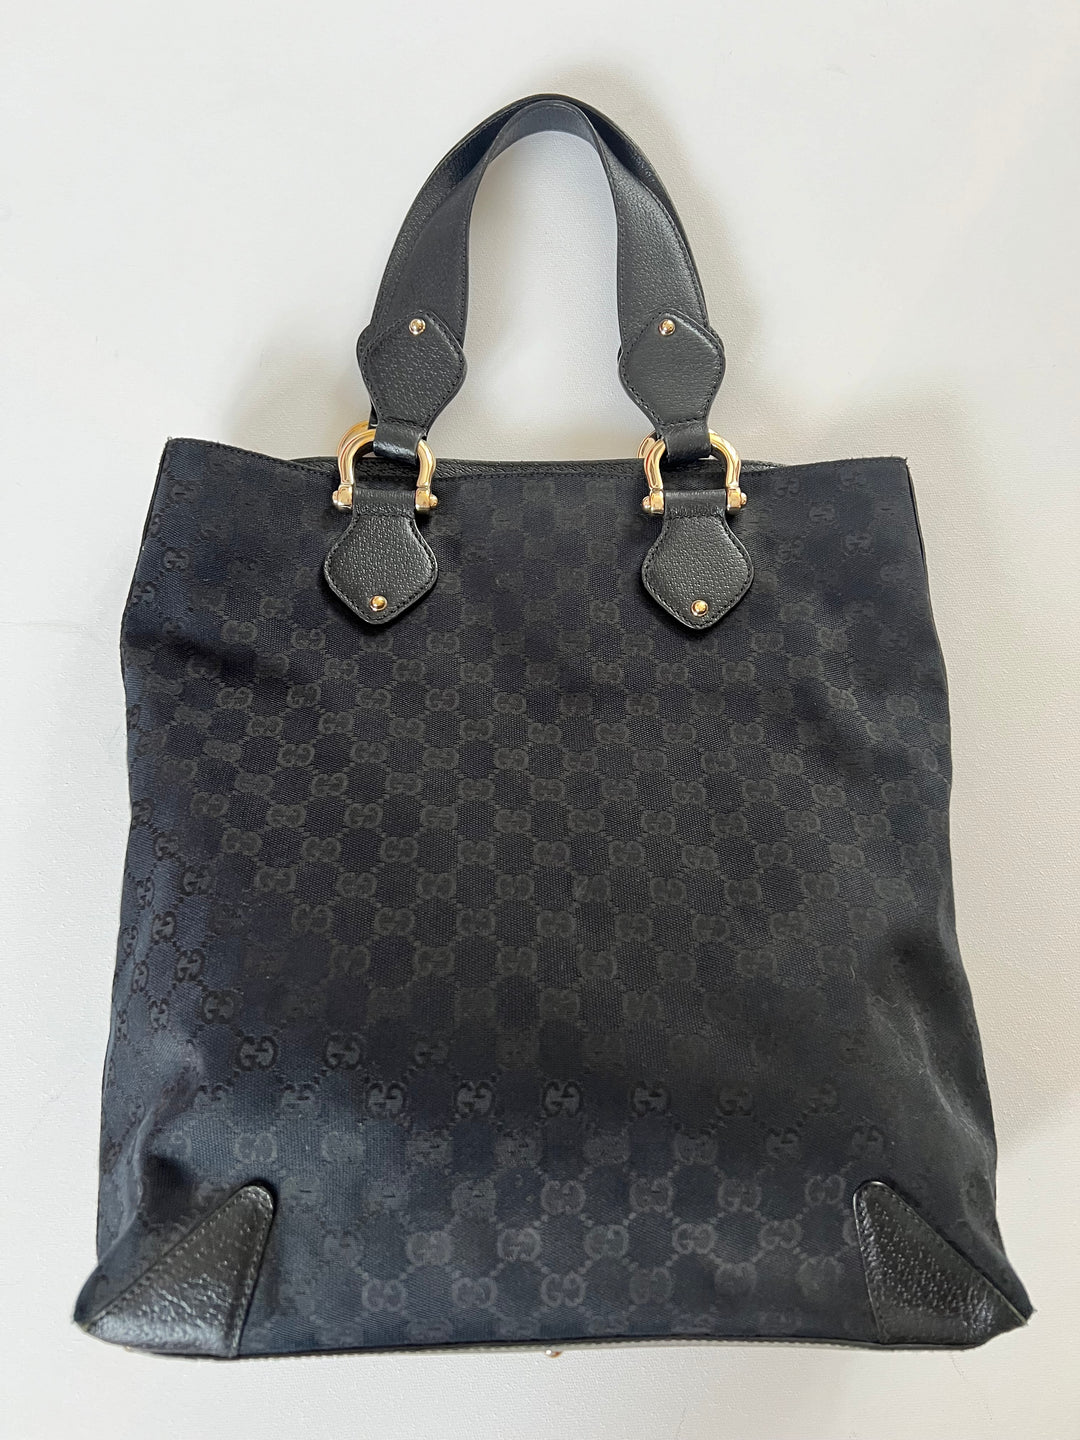 Black tote bag with GG design and black leather top handle